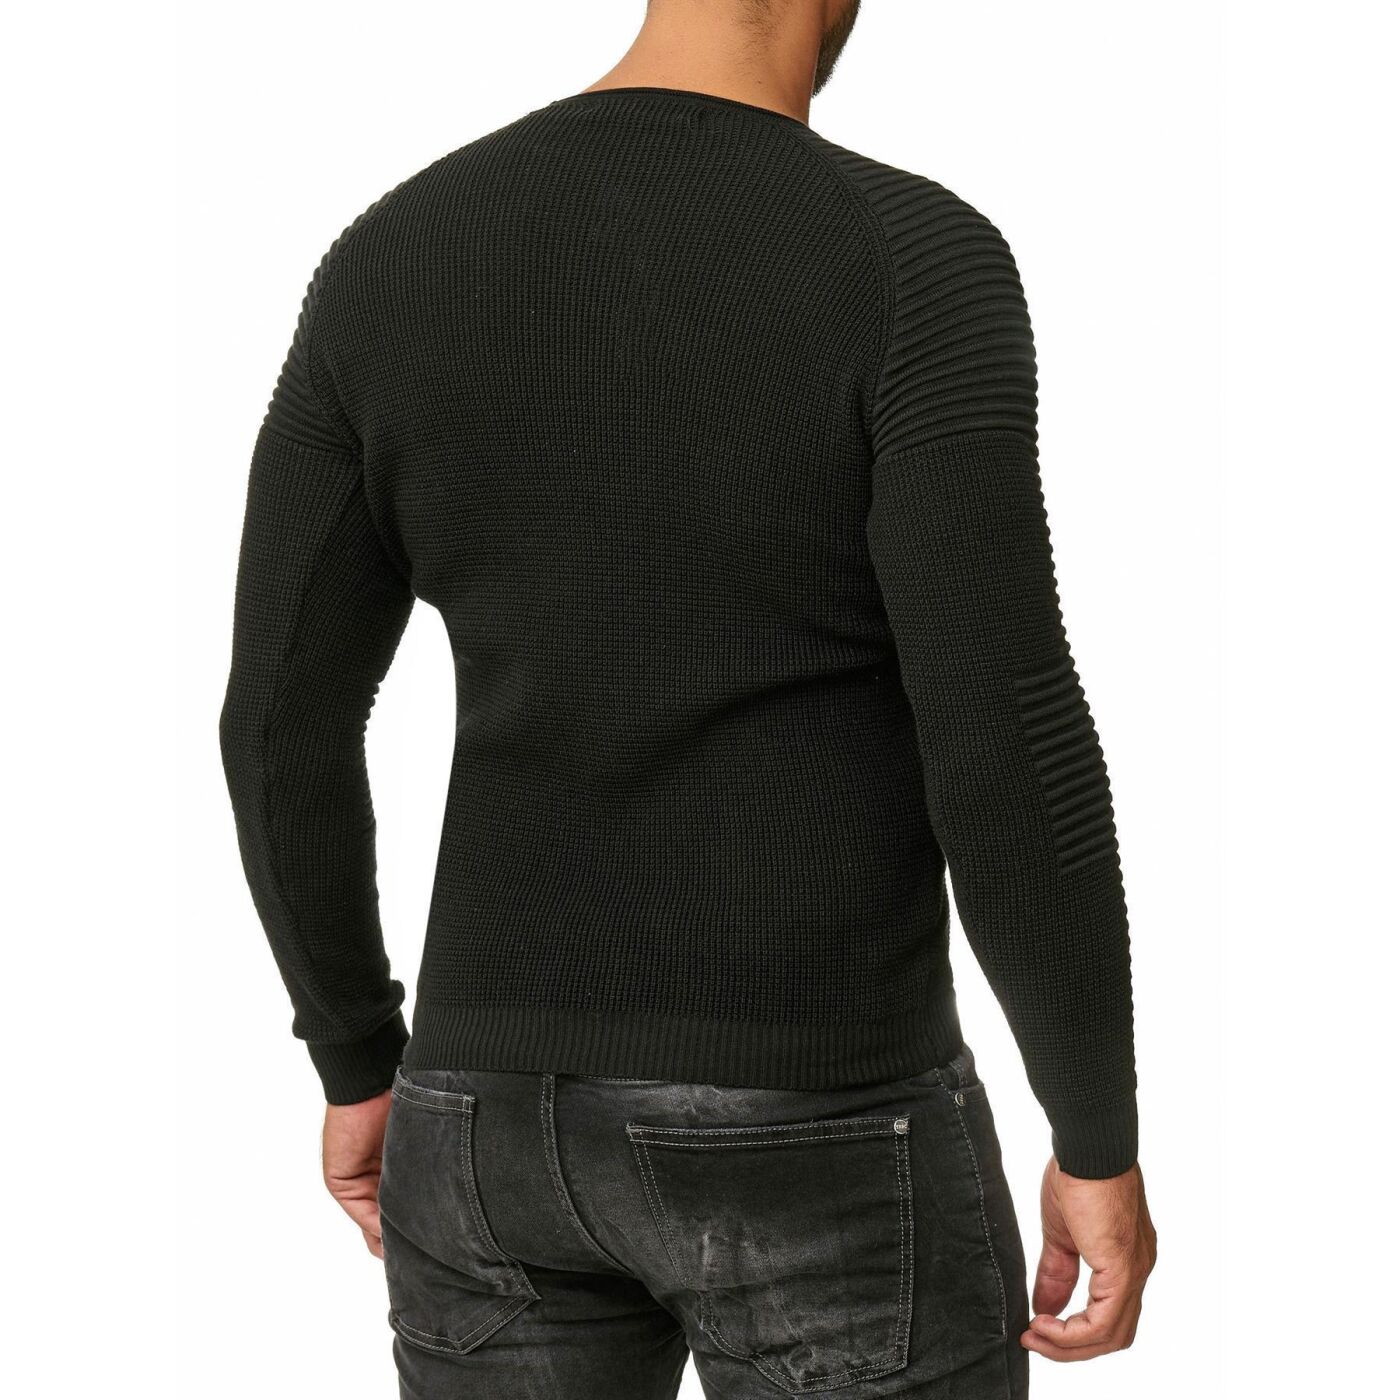 UUYUK Men Slim Fit Cable Knit Long Sleeve Round Neck Sweater Pullover